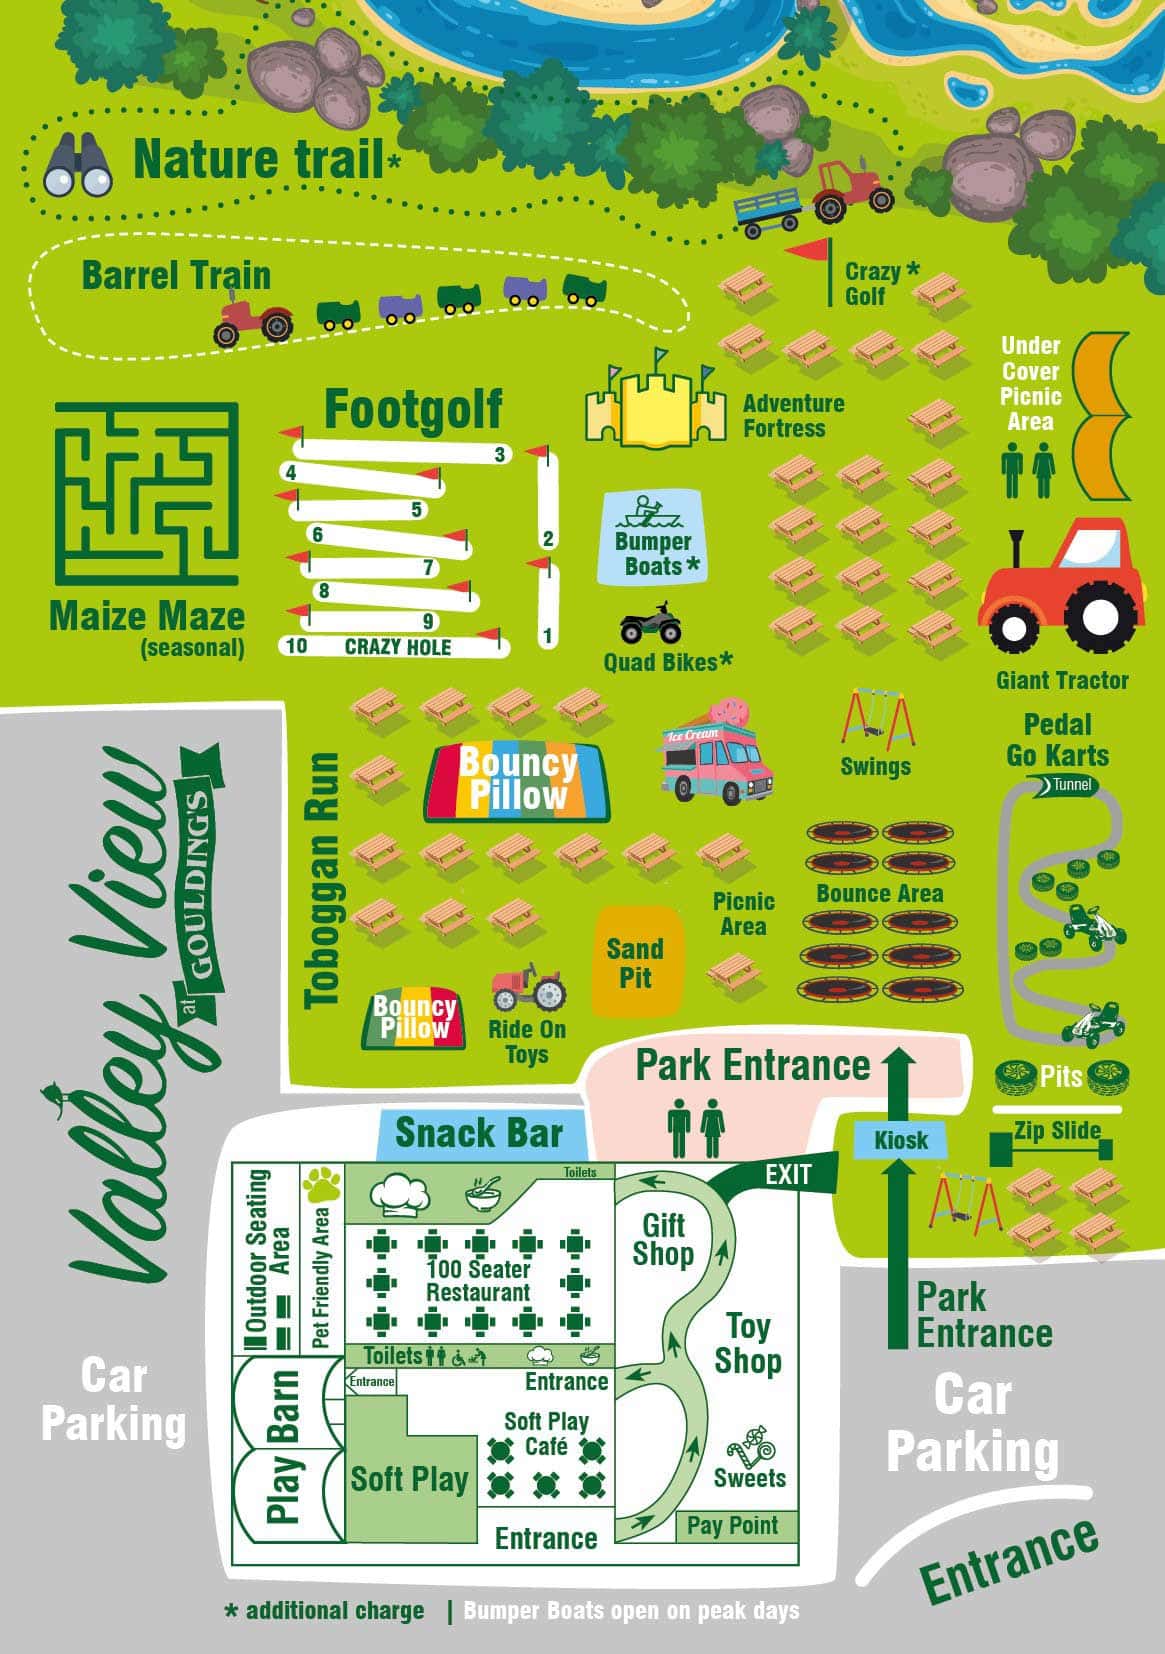 vallery-view-park-map-guide-07-22